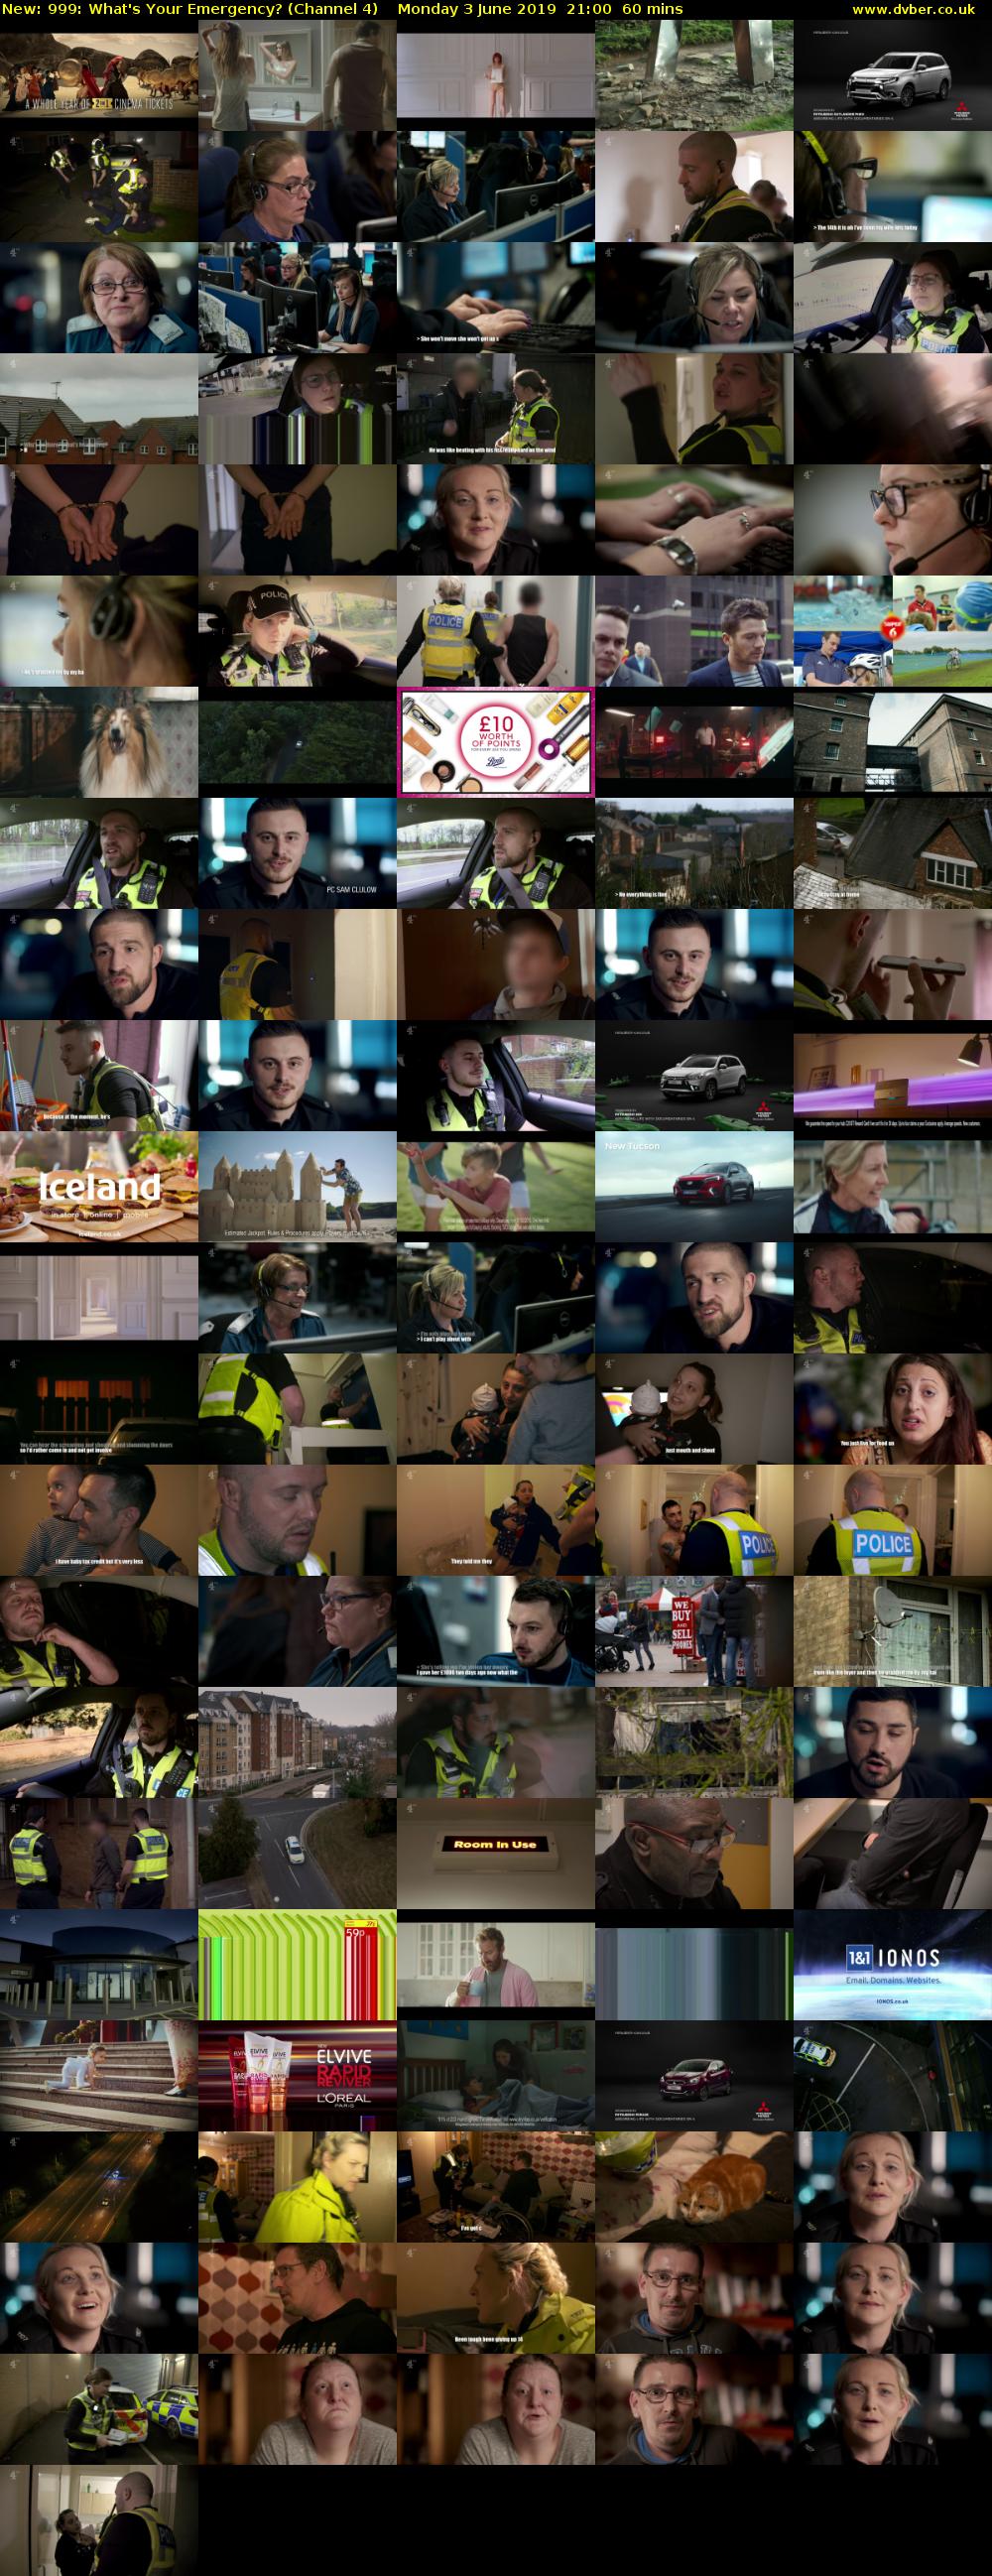 999: What's Your Emergency? (Channel 4) Monday 3 June 2019 21:00 - 22:00